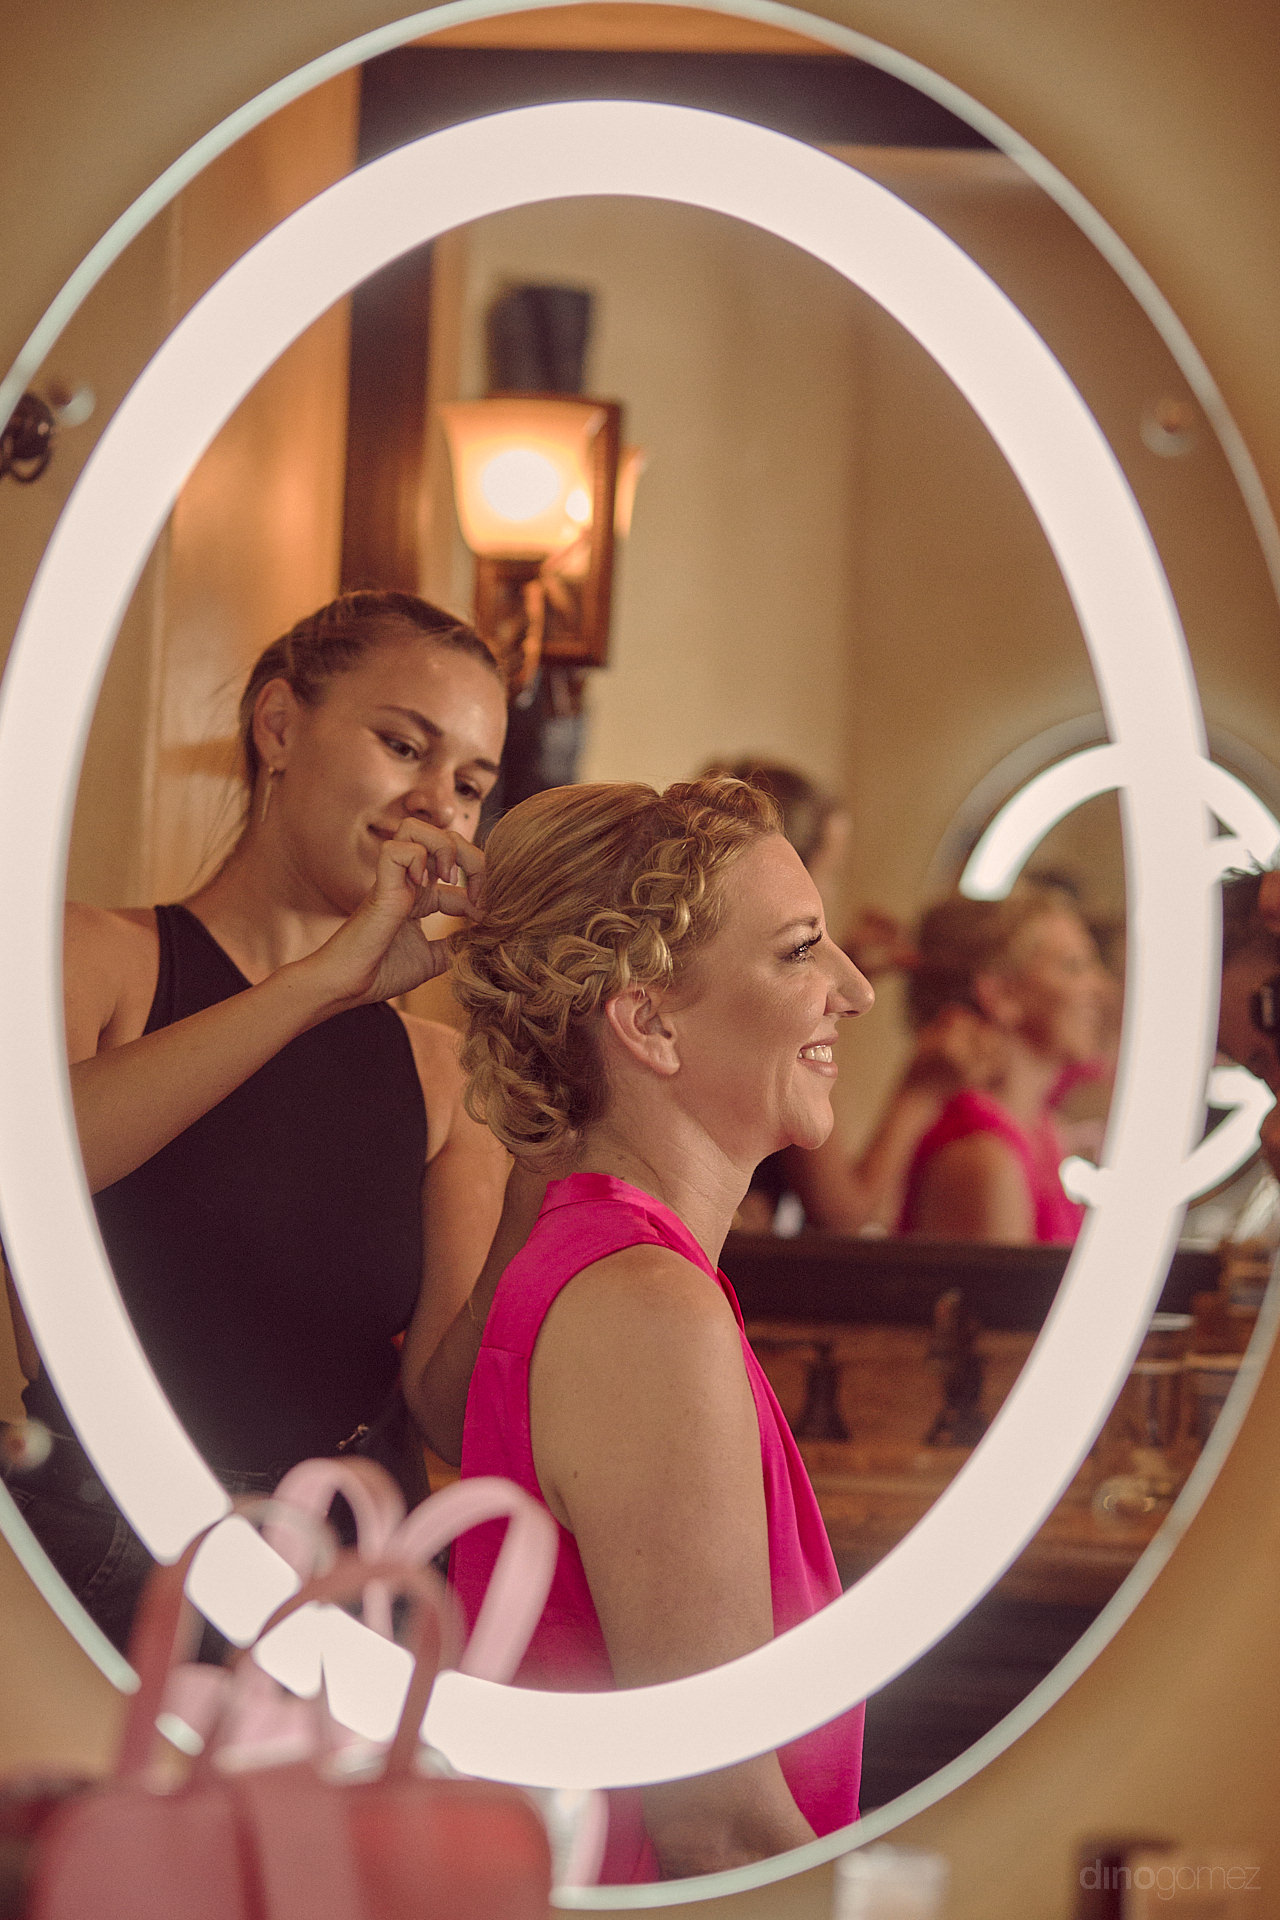 A Woman Is Getting Her Hair Done In A Mirror.